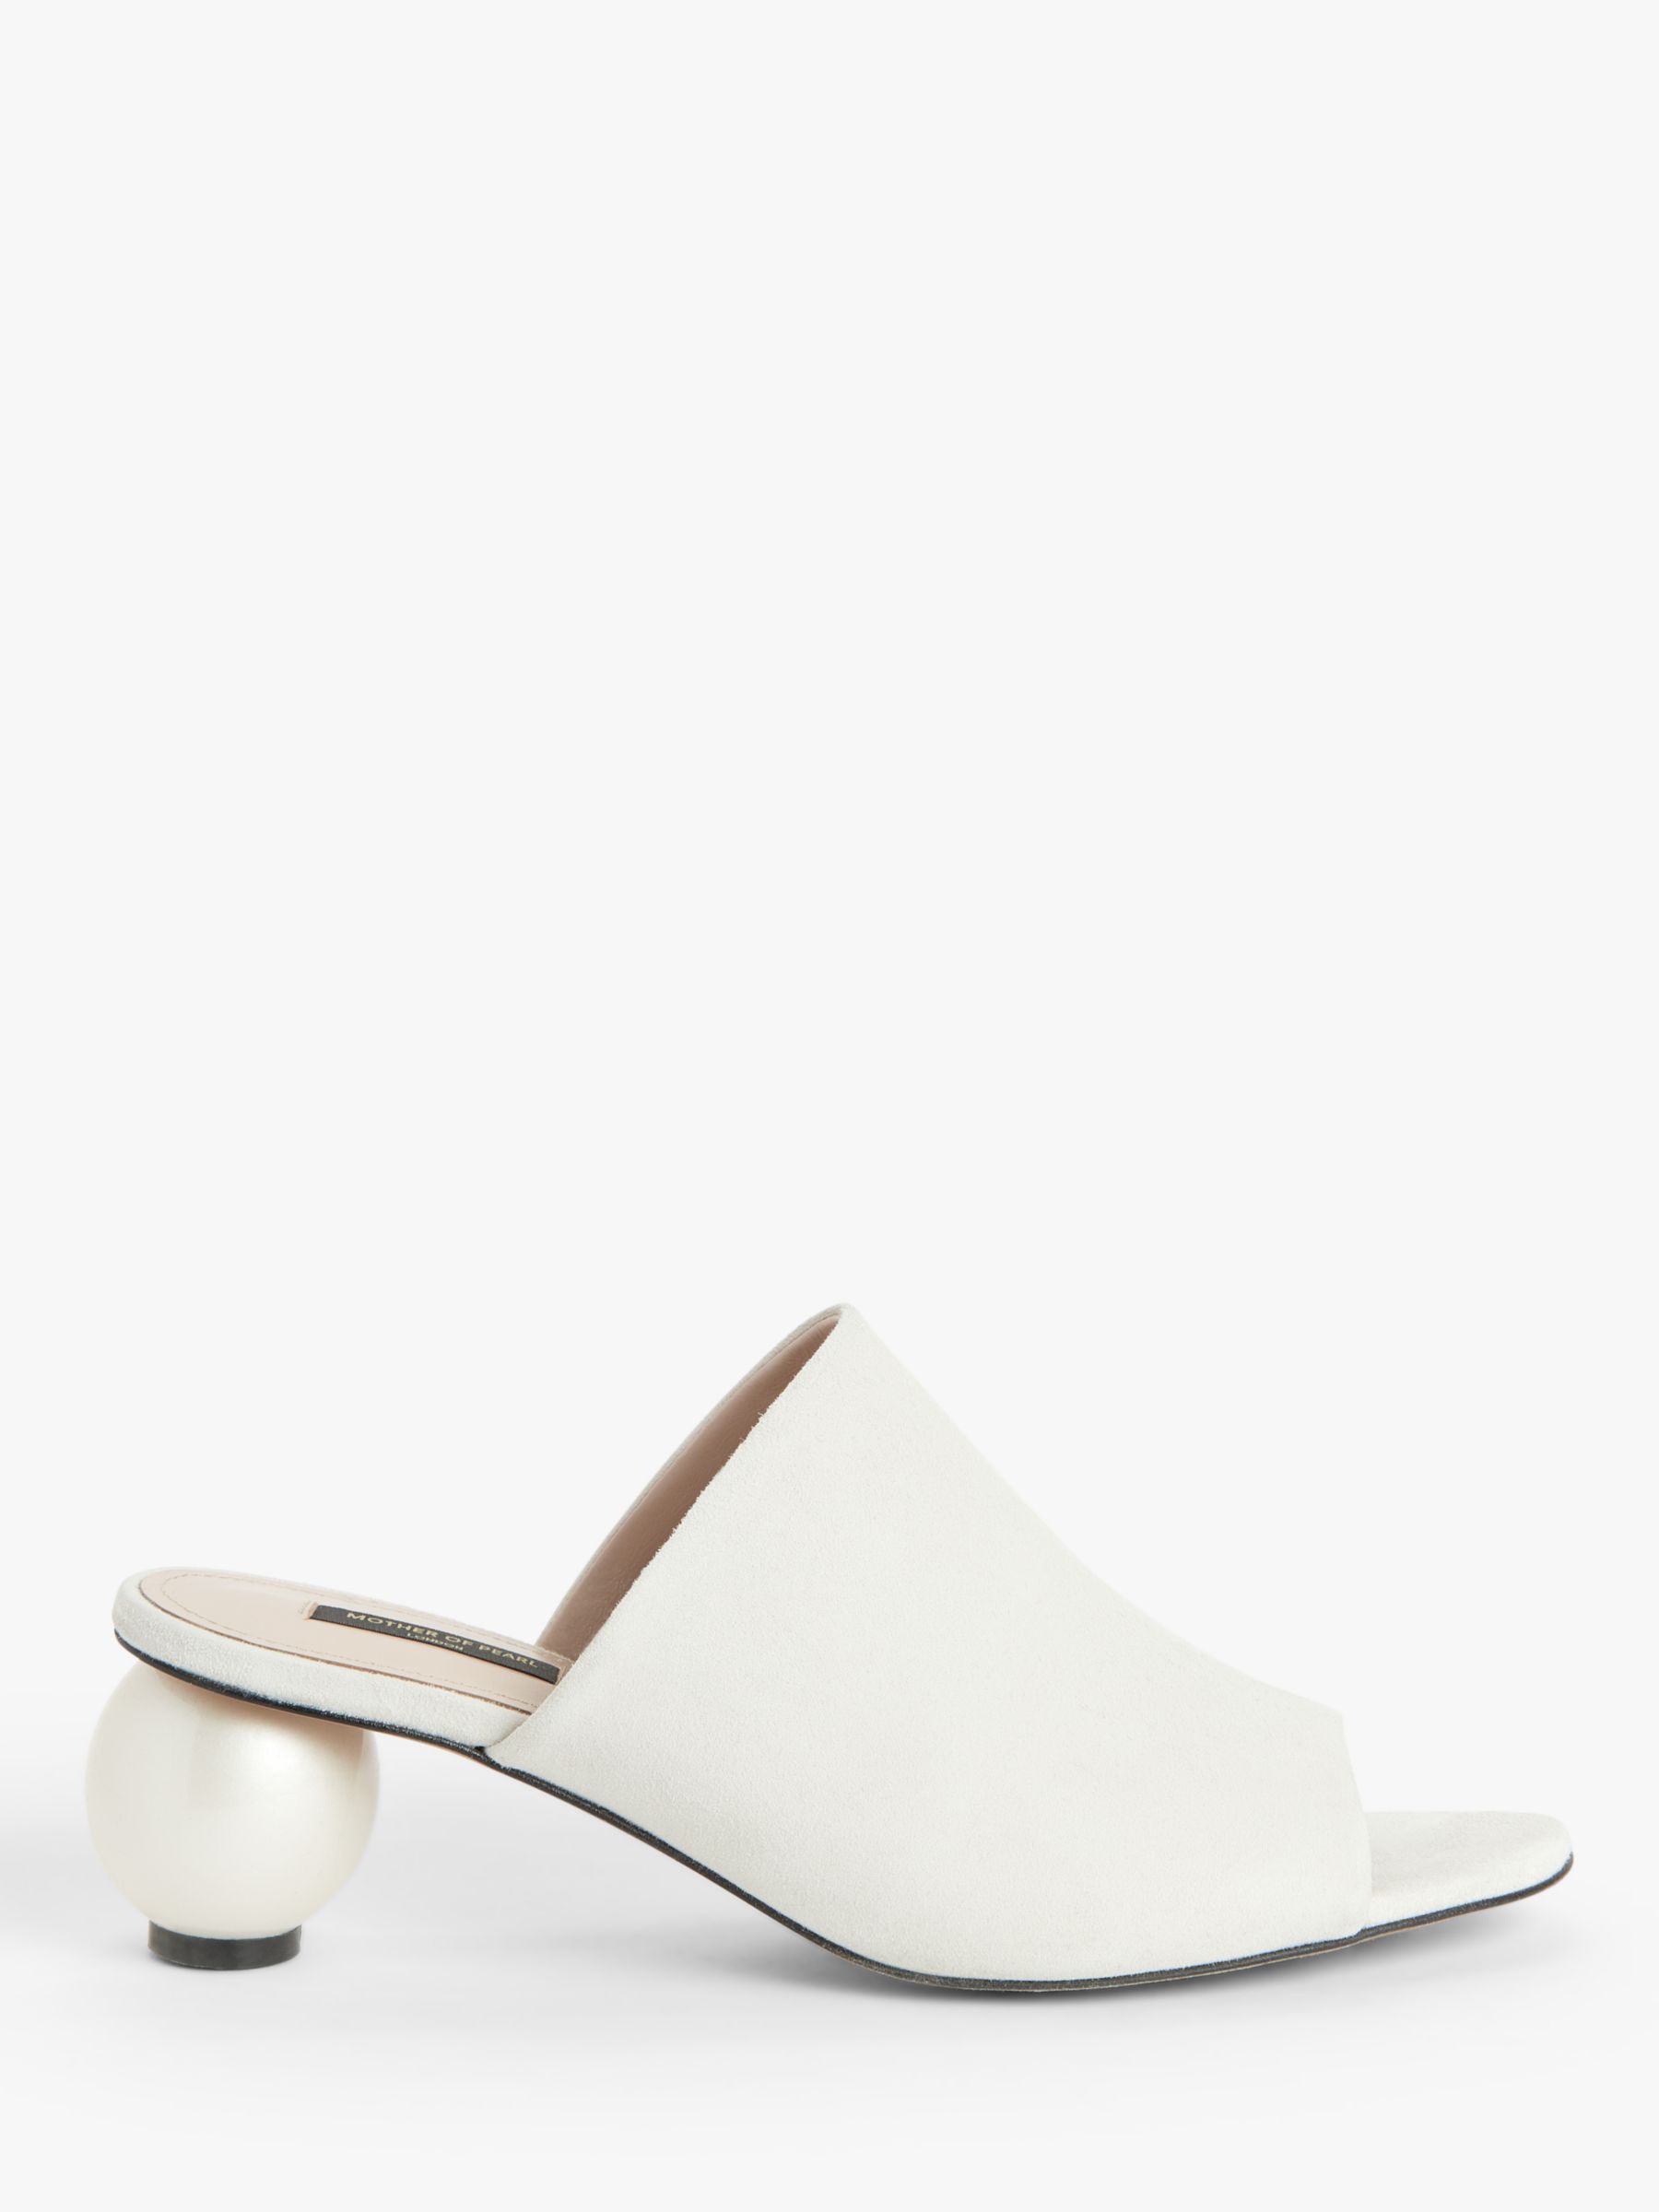 Mother of Pearl Pearl Heel Mules, Stone